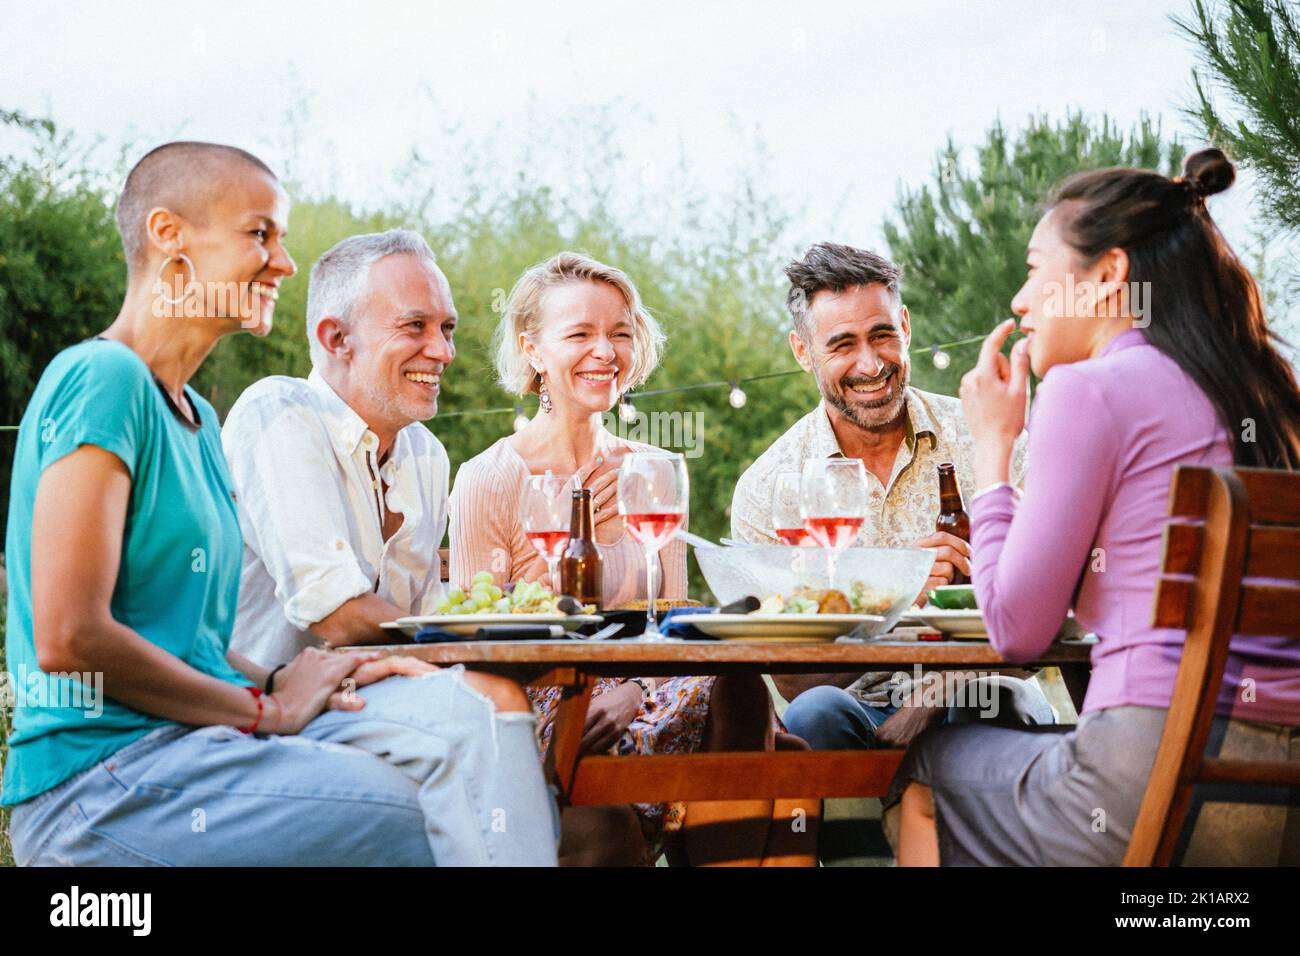 Group of adult friends or familly talking and having fun sitting at table in a dinner party in a back yard. Lifestyle concept. Stock Photo